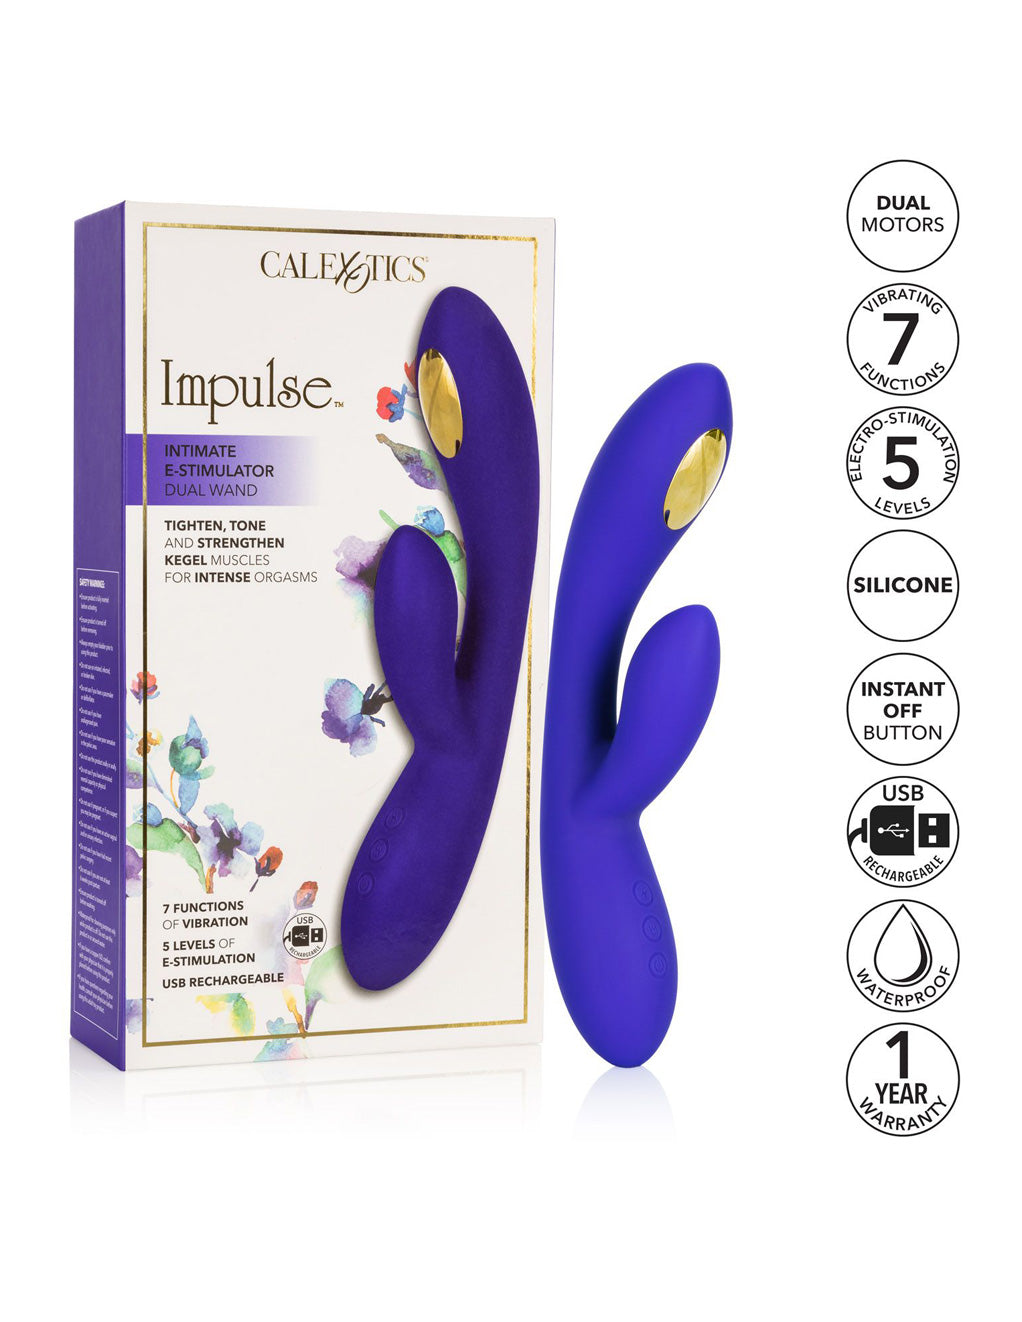 Impulse Intimate E Stim Dual Wand By California Exotics Packaging With Key Features